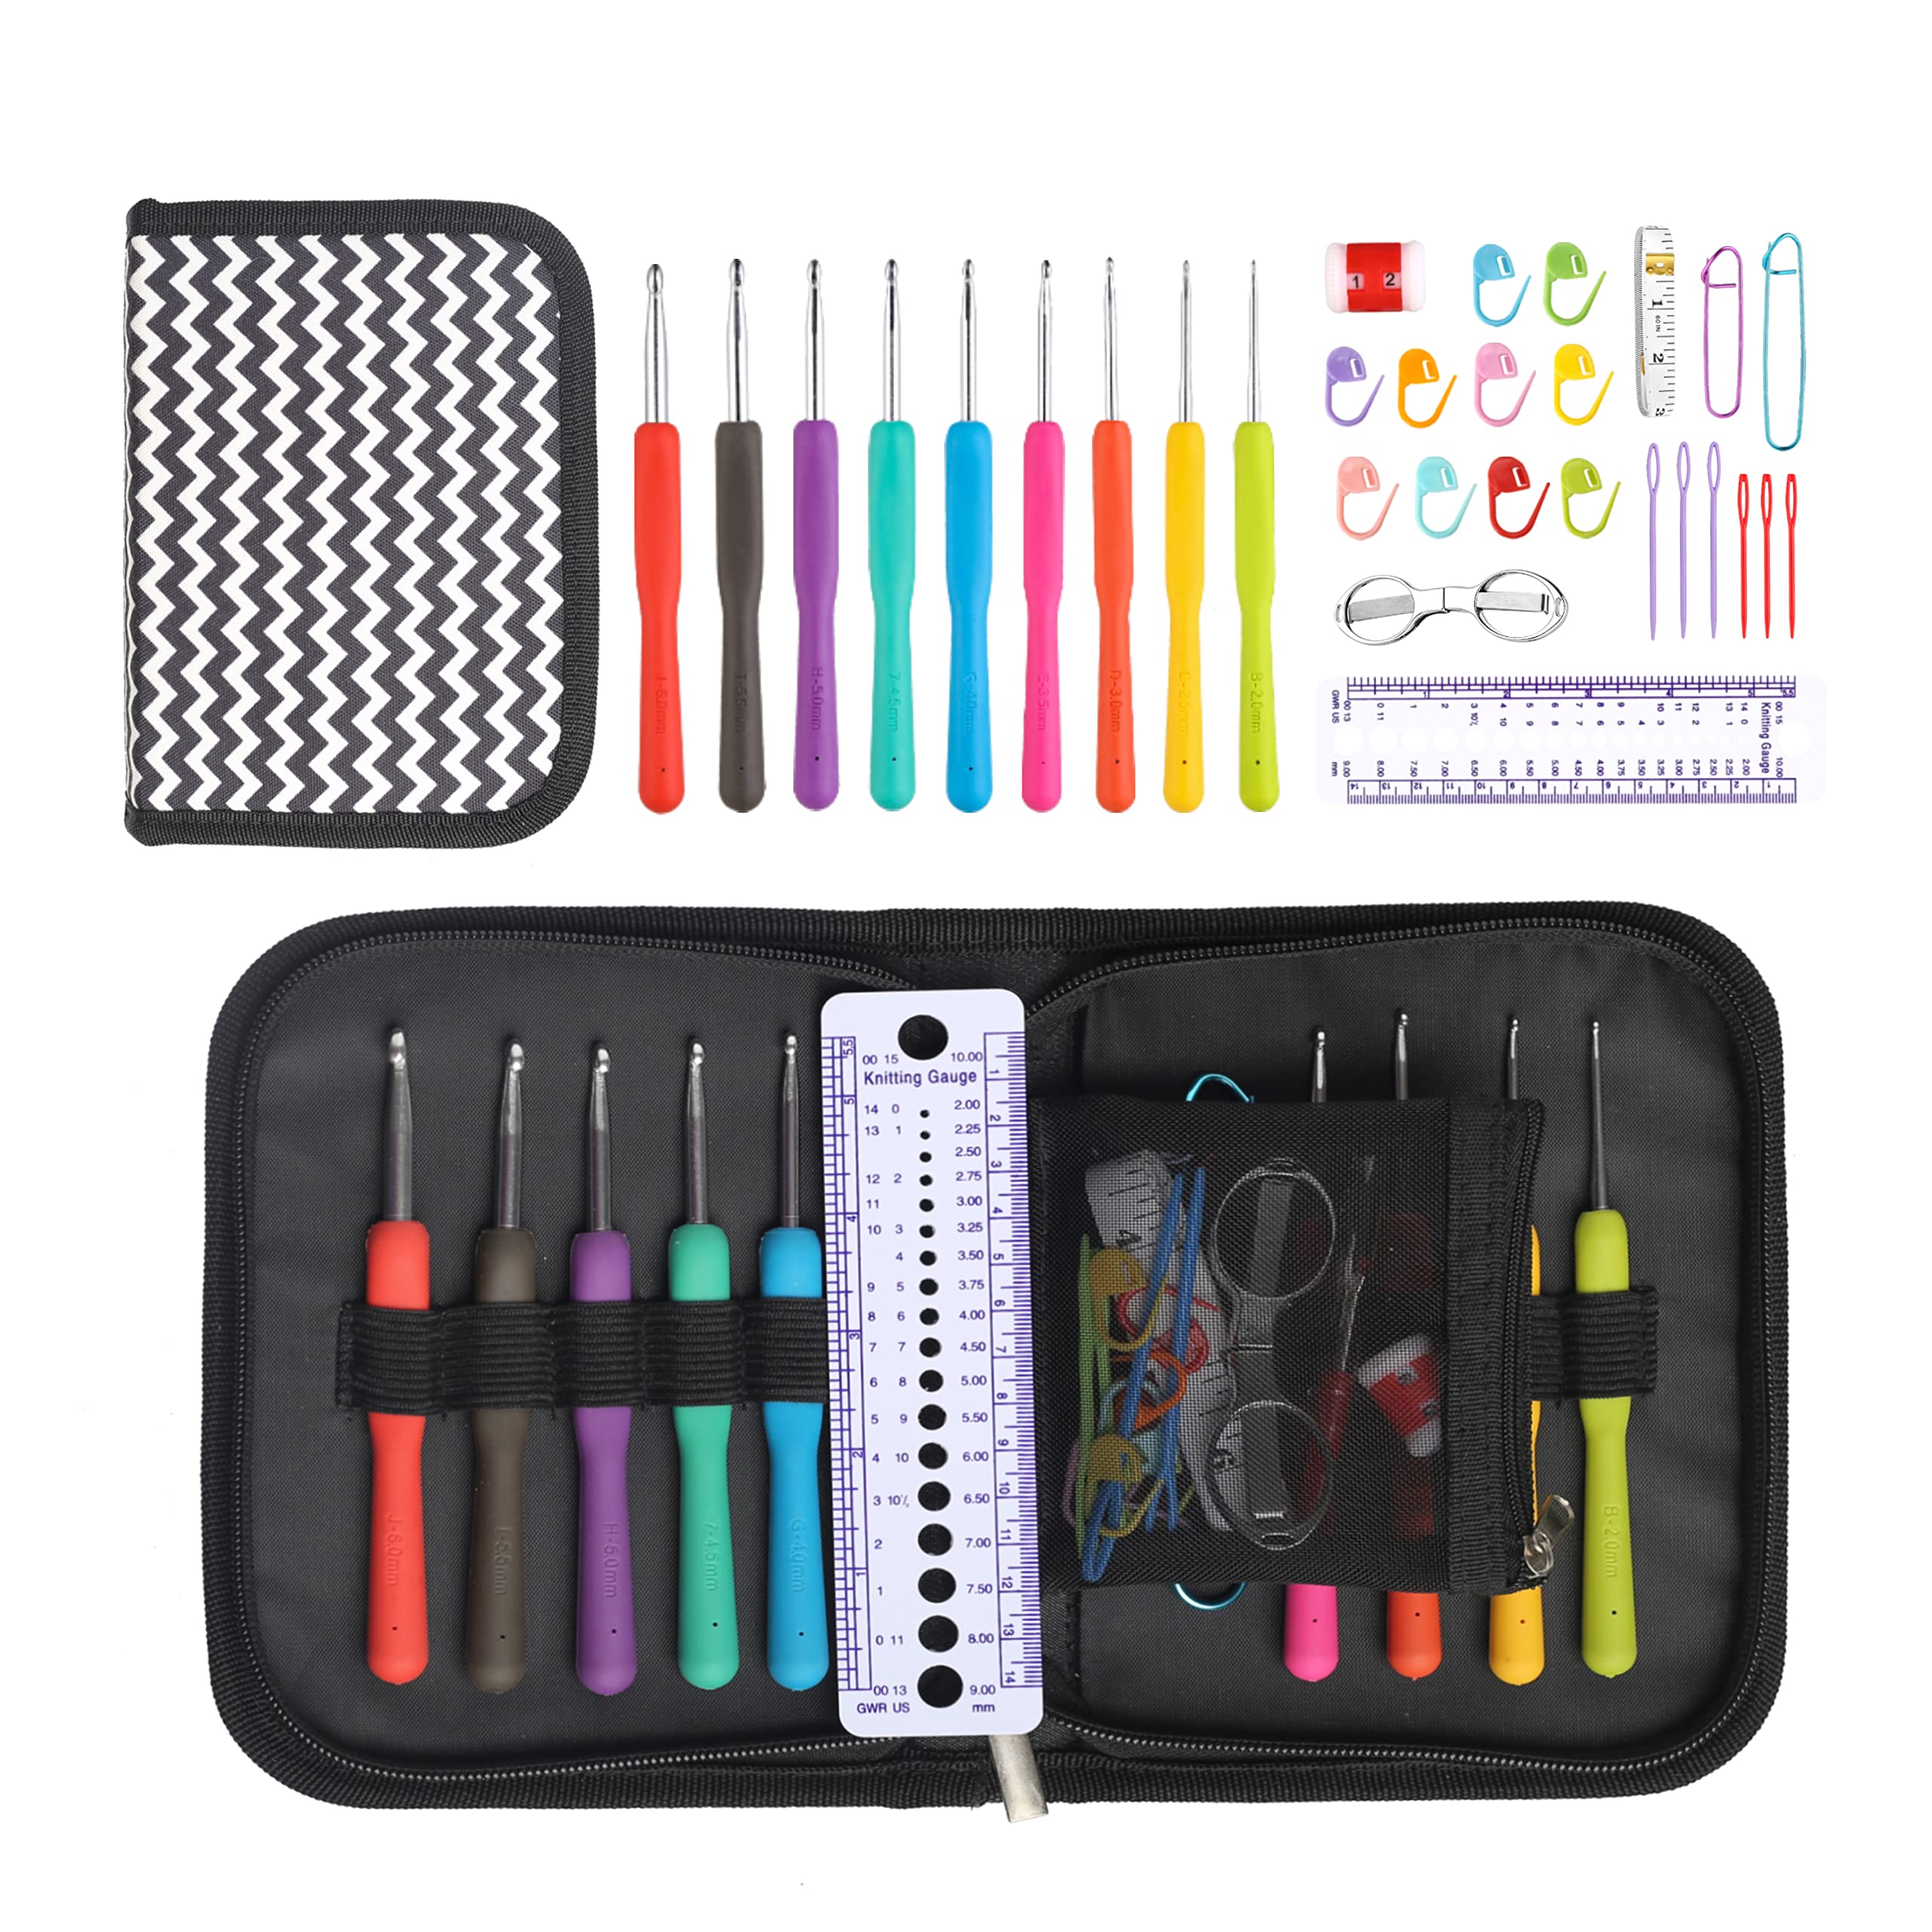 Crochet Kit for All Levels, 31 Pcs Crochet Hooks Set, 9 Sizes, 22  Accessories for Crocheting and Arthritic Hands Black